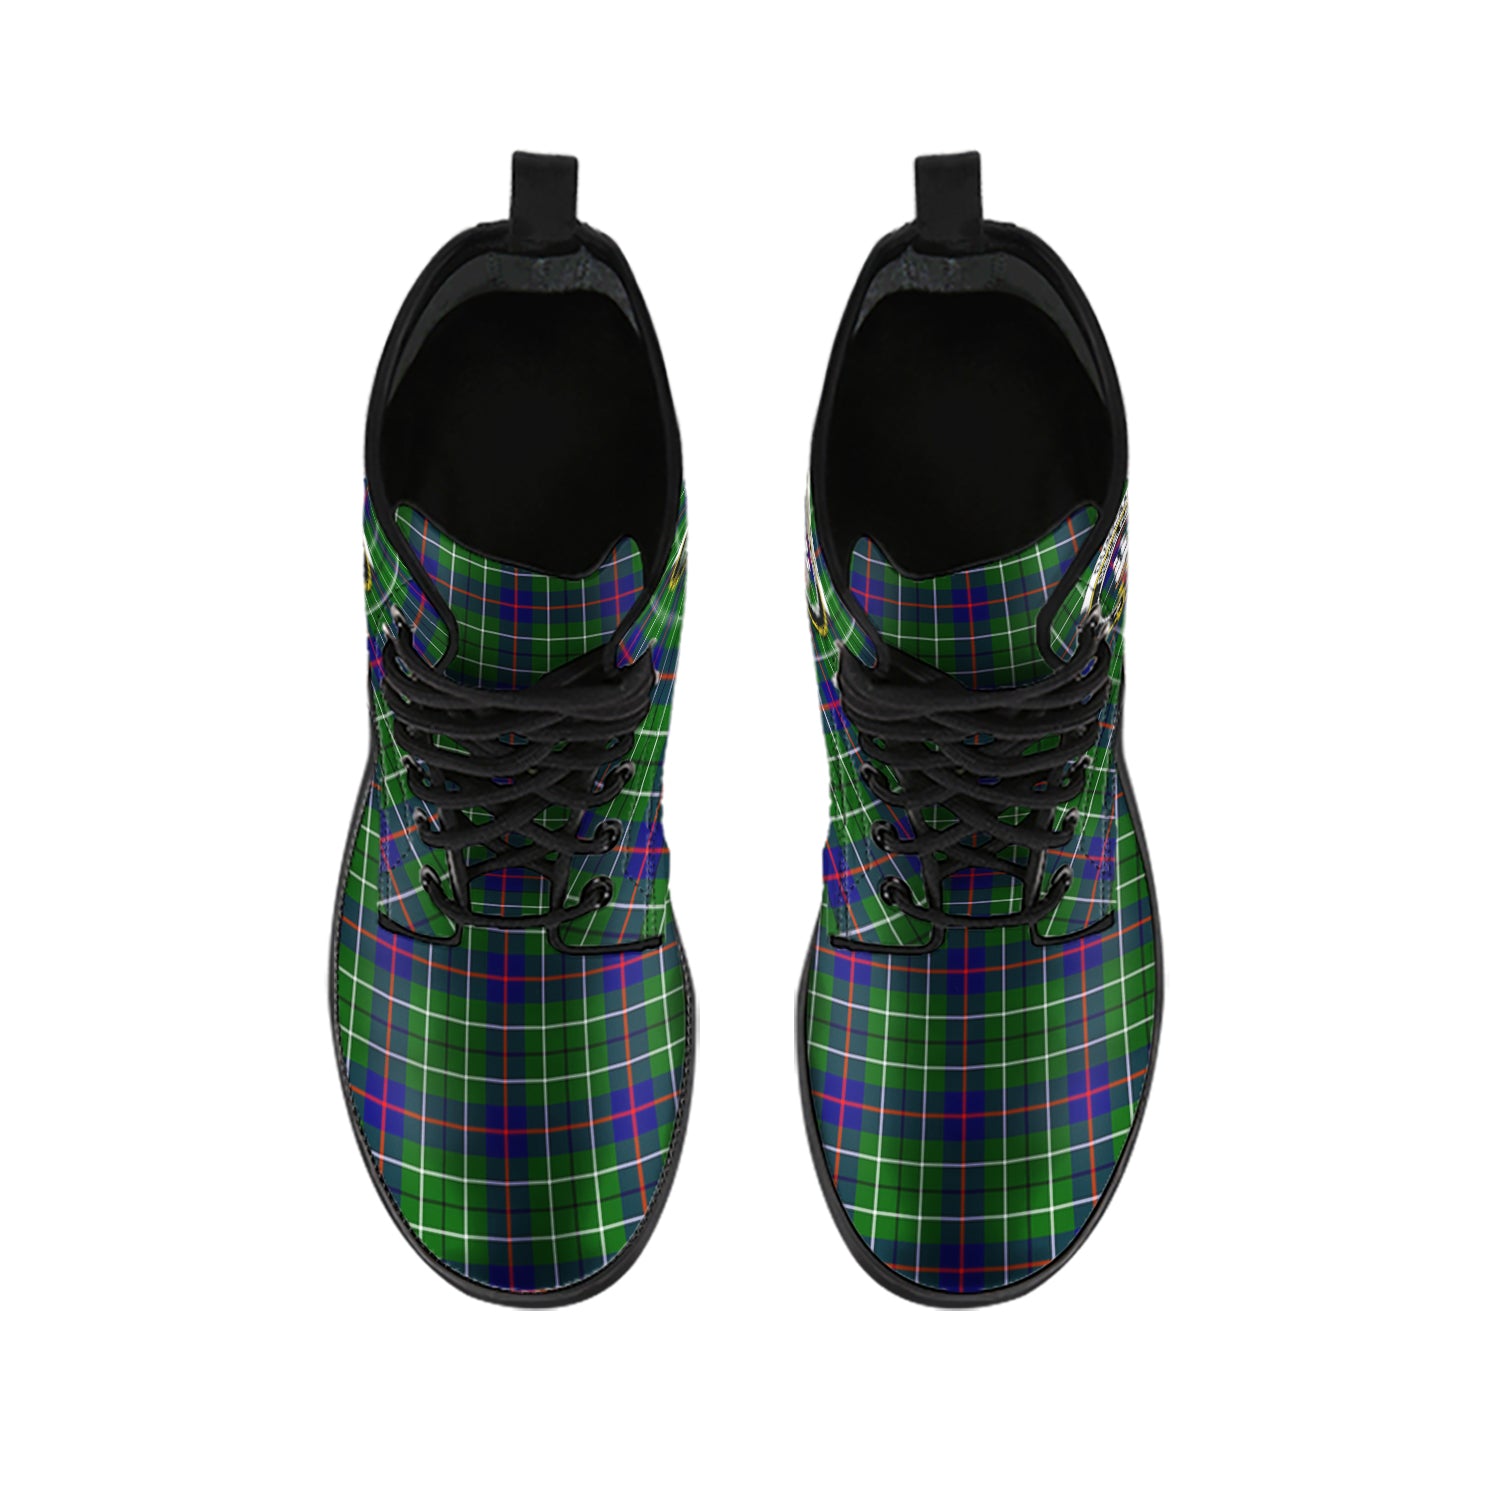 duncan-modern-tartan-leather-boots-with-family-crest